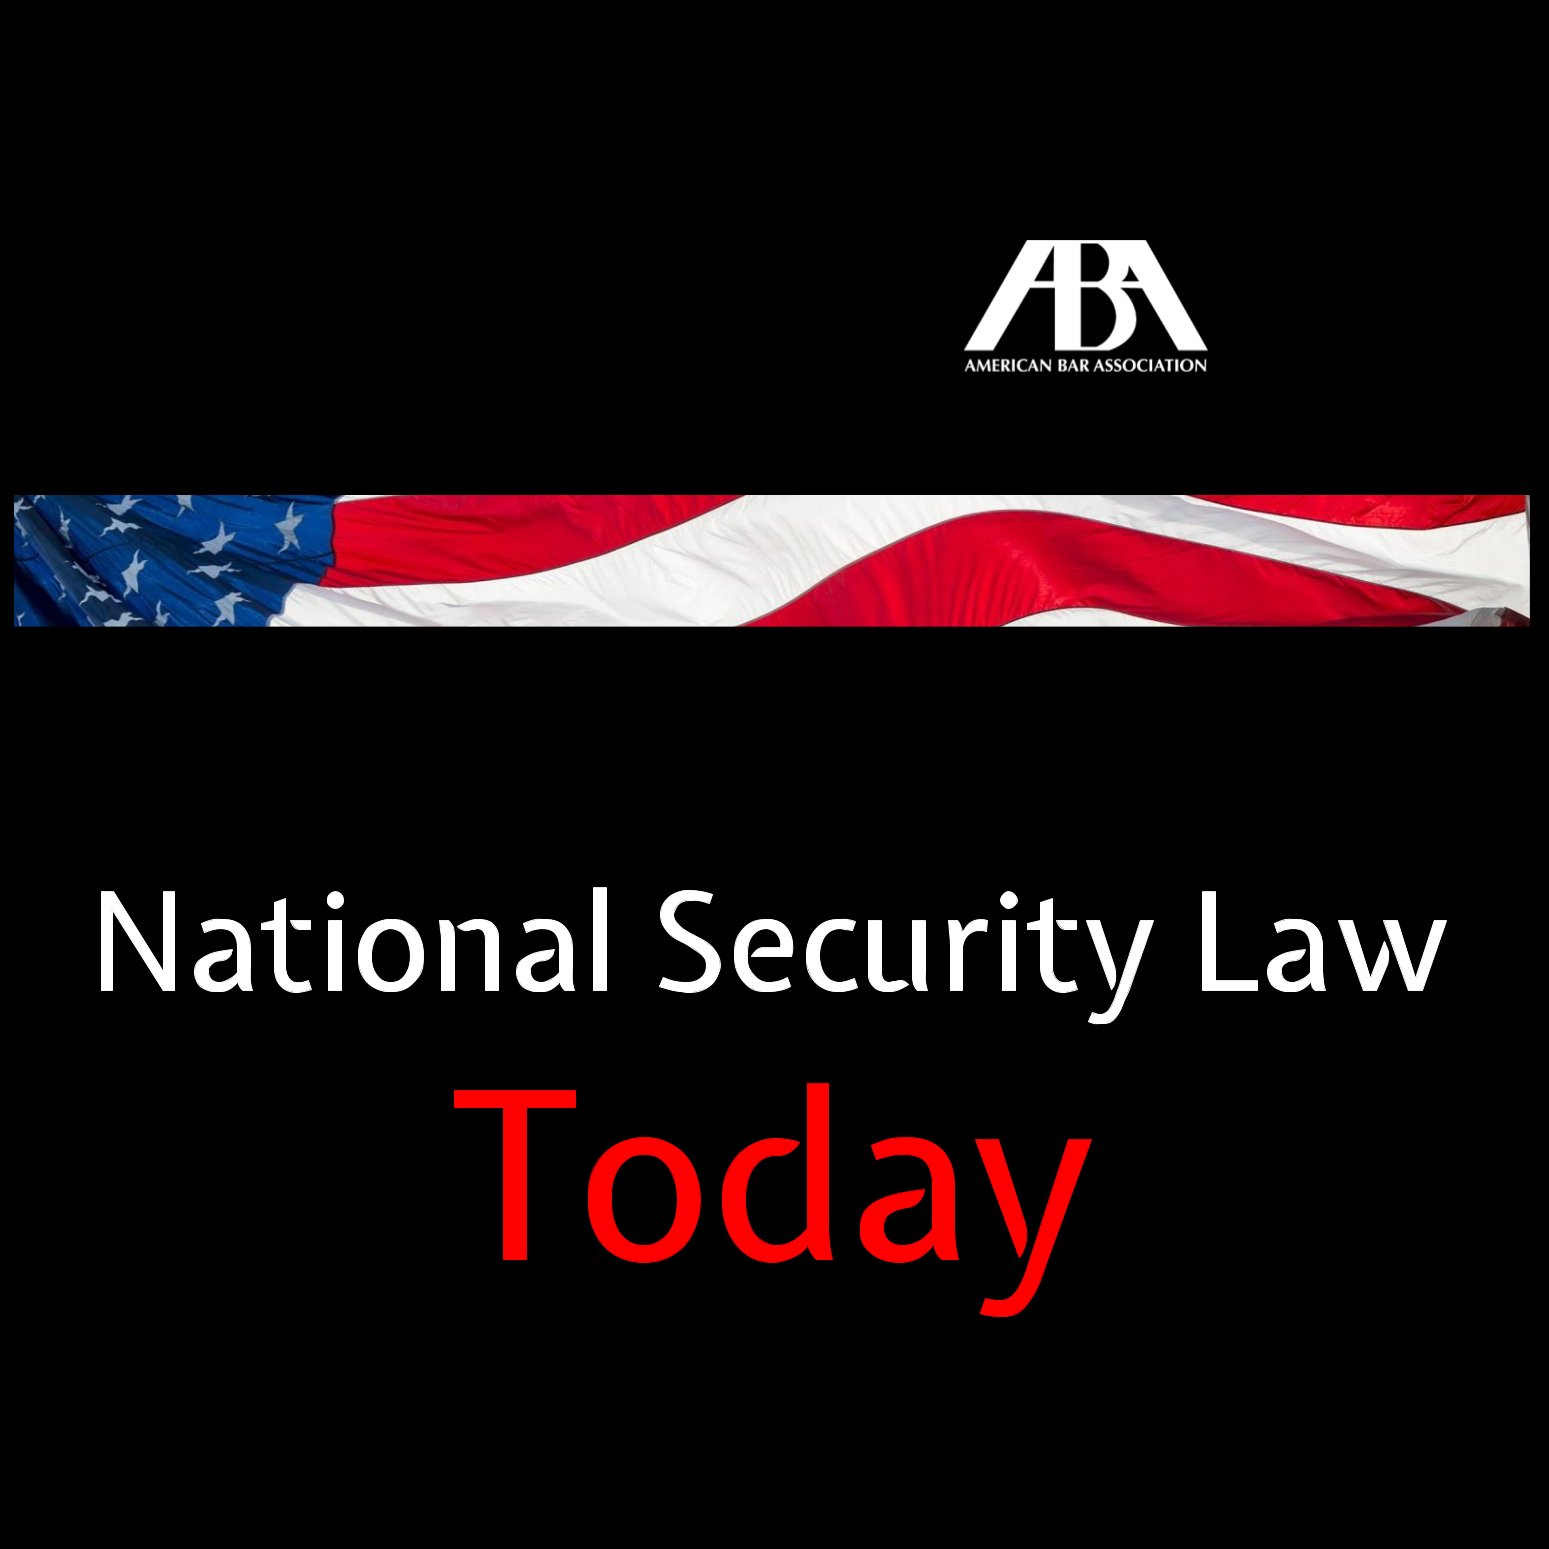 A National Security Law podcast from the American Bar Association Standing Committee on Law and National Security